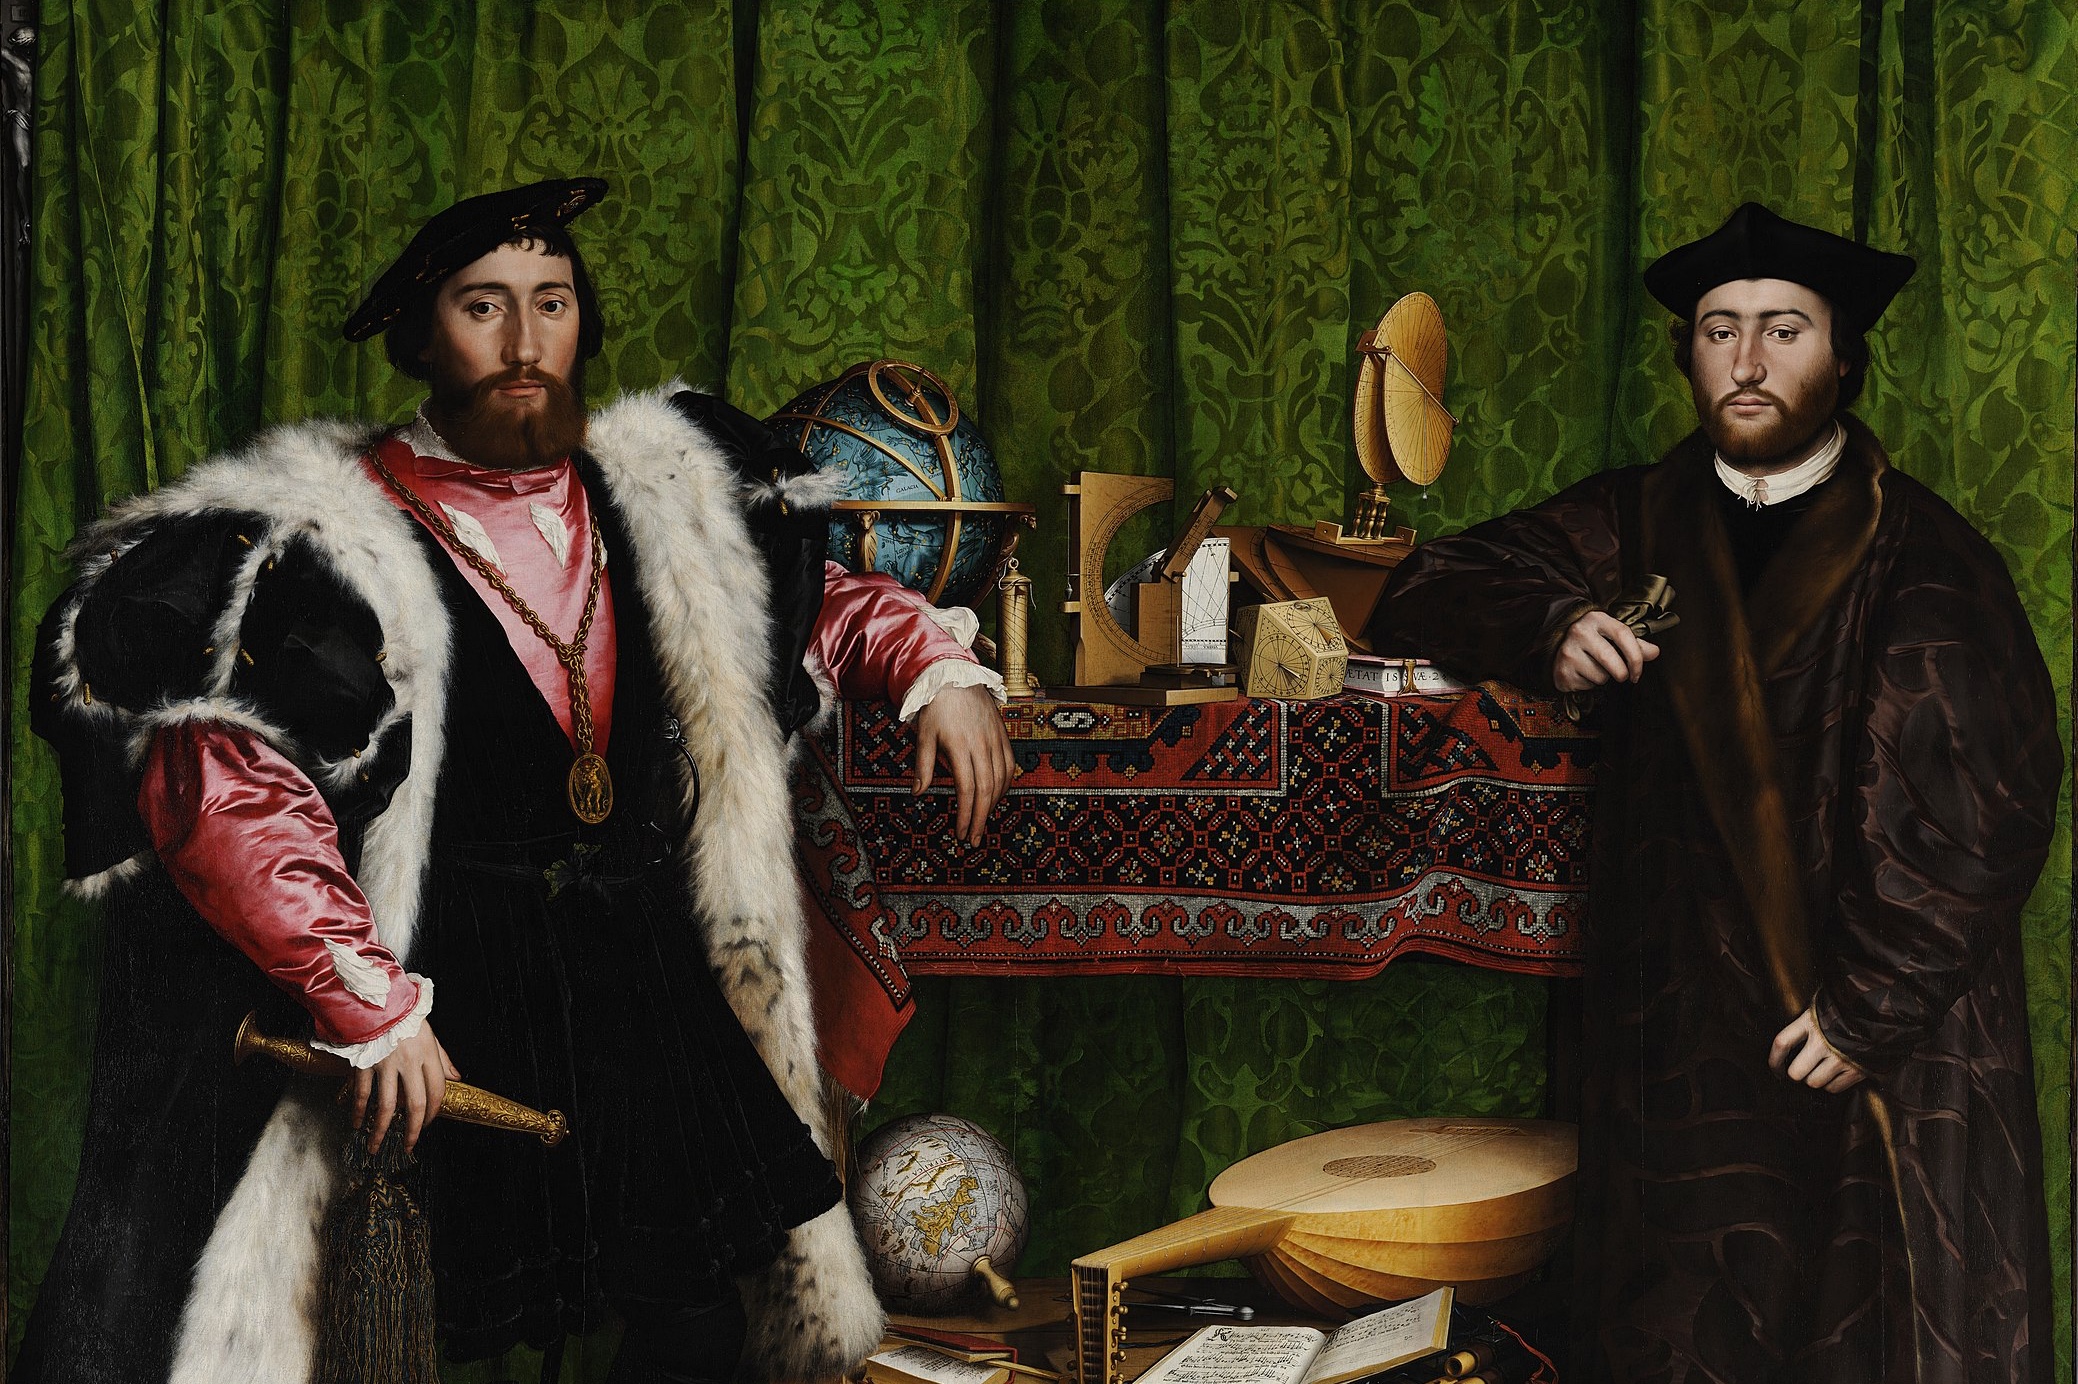 Jean de Dinteville, French Ambassador to the court of Henry VIII of England, and Georges de Selve, Bishop of Lavaur in the famous painting The Ambassadors by Hans Holbein